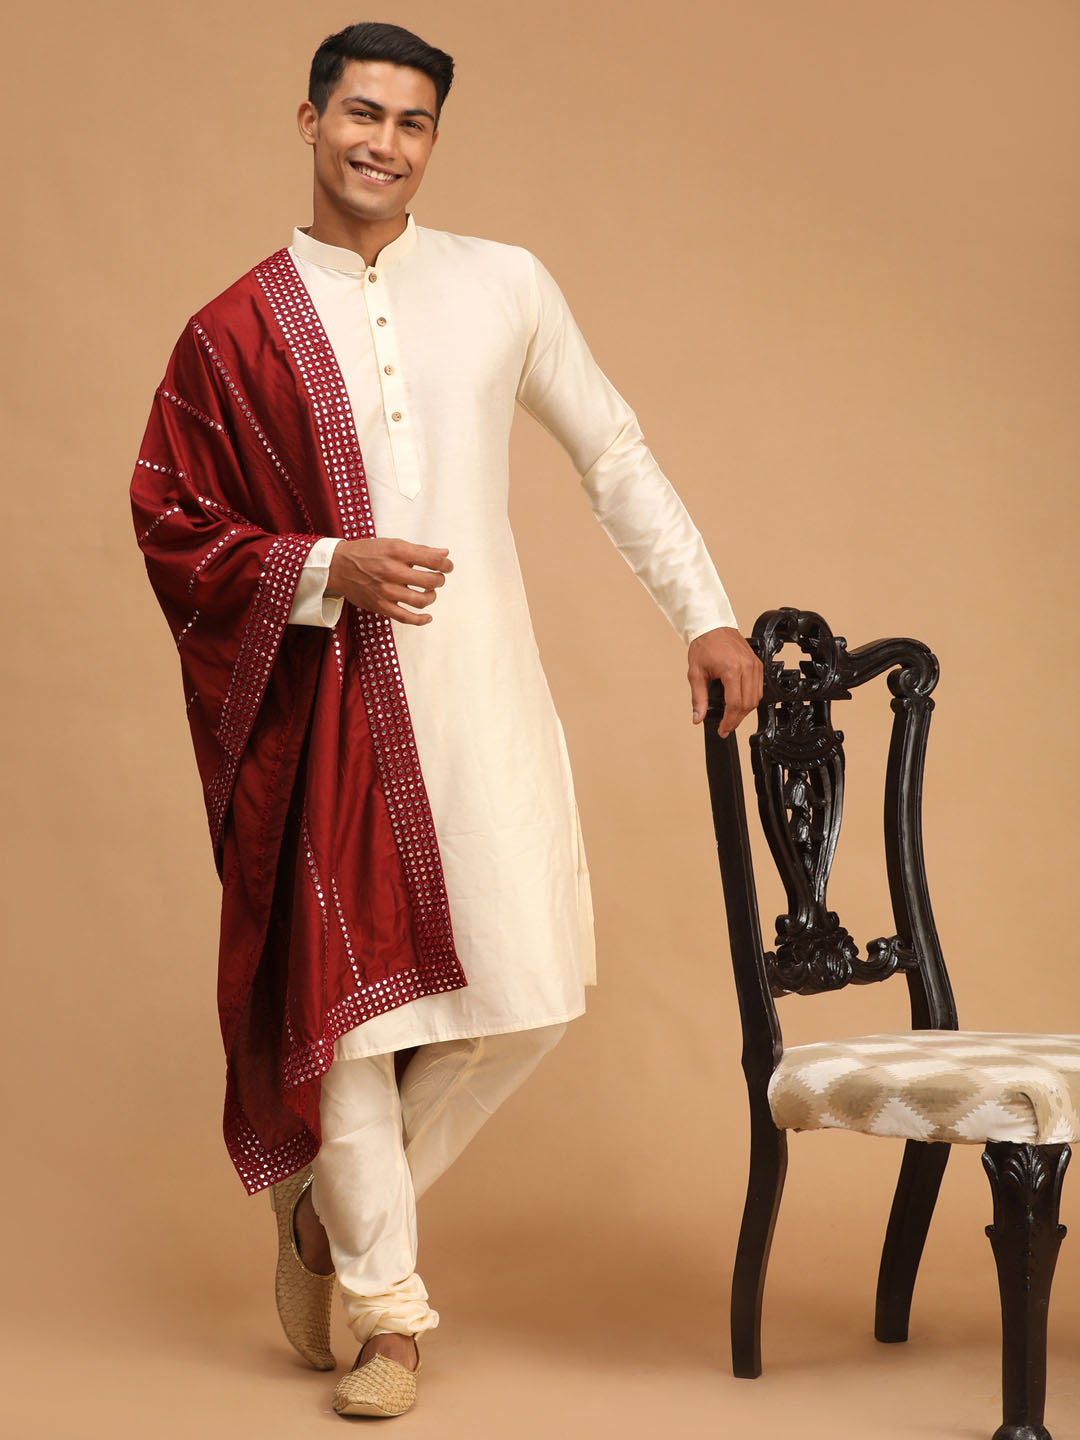 White Dhoti: Over 965 Royalty-Free Licensable Stock Photos | Shutterstock